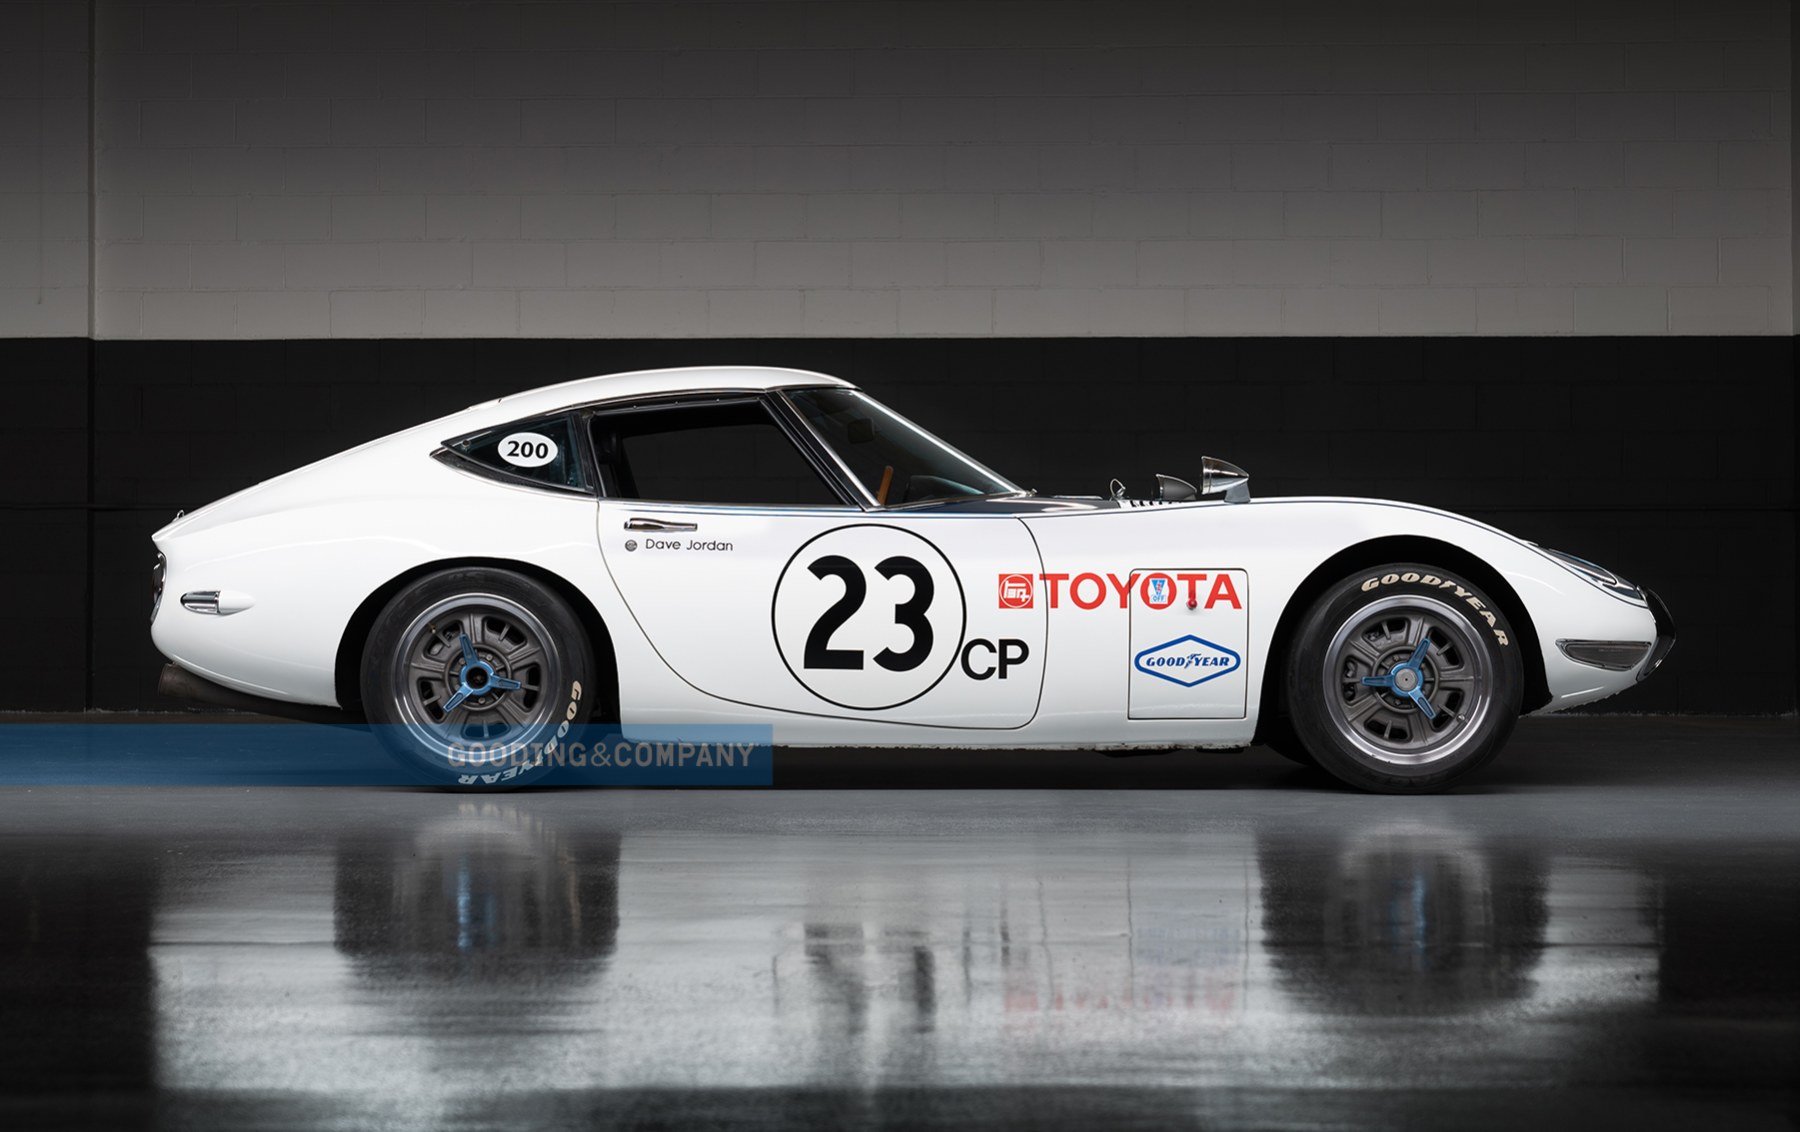 Toyota 2000GT Shelby